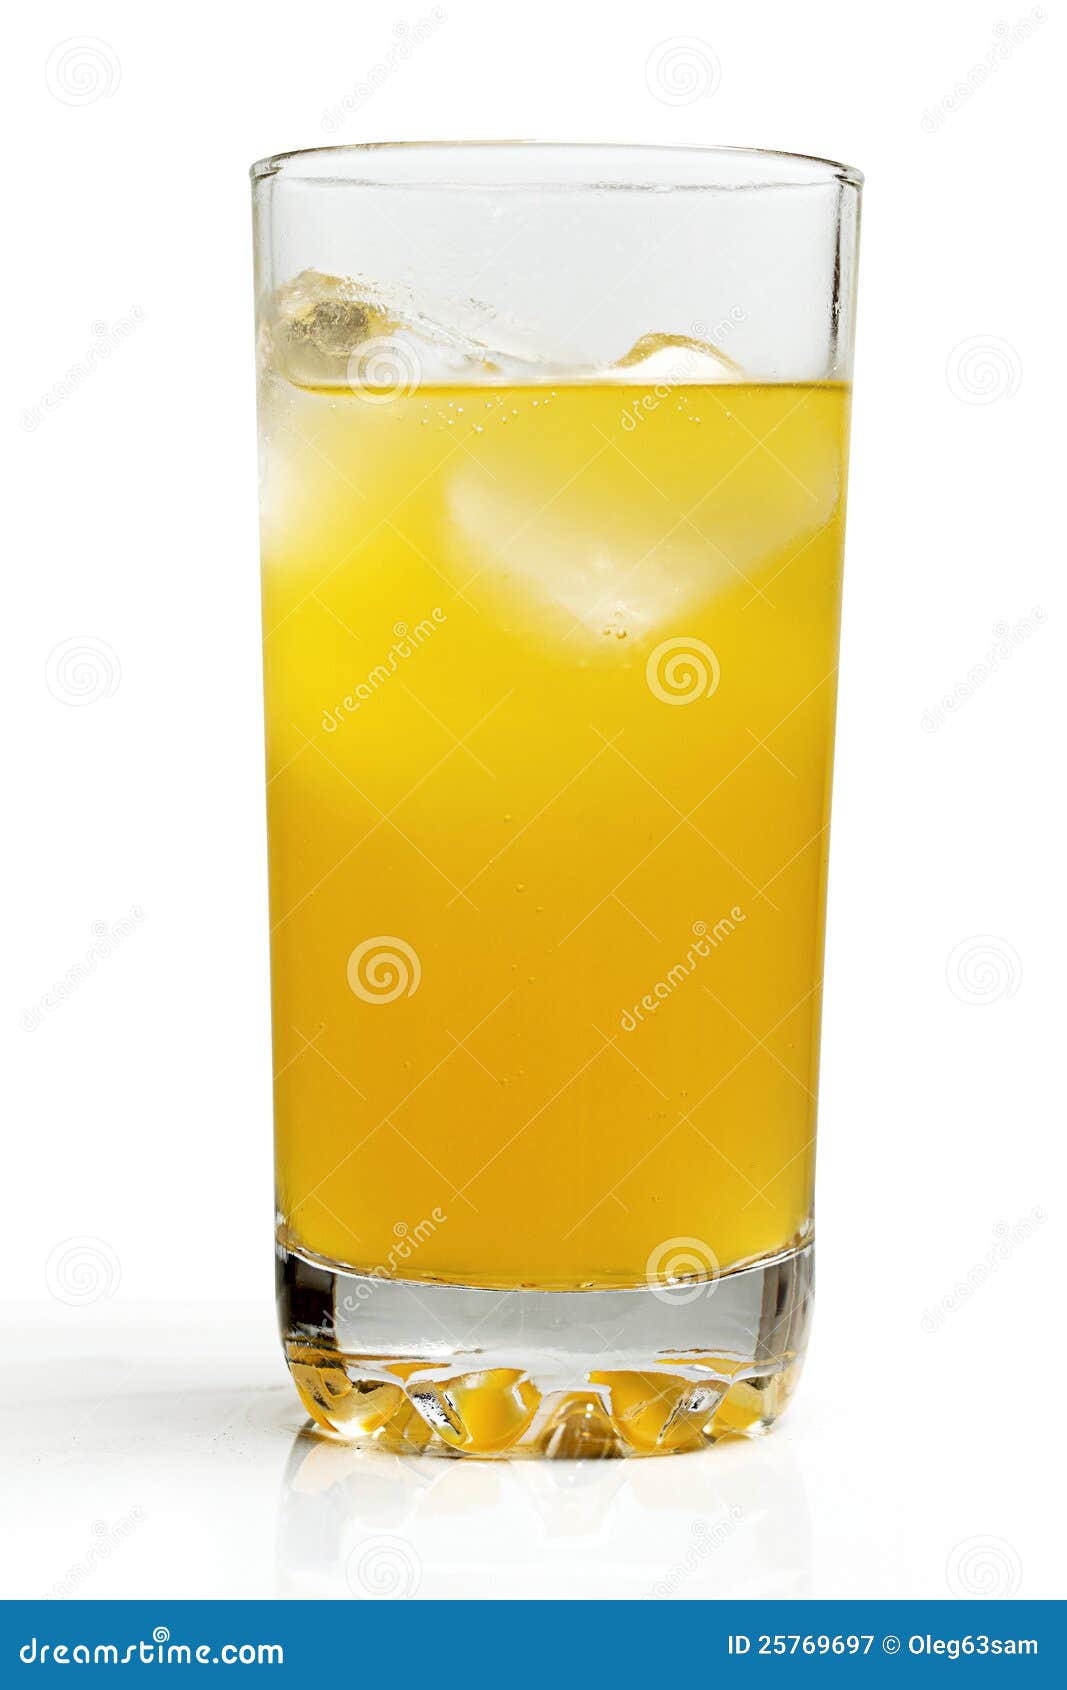 Chilled orange drink. Chilled orange drink with ice on a white background.